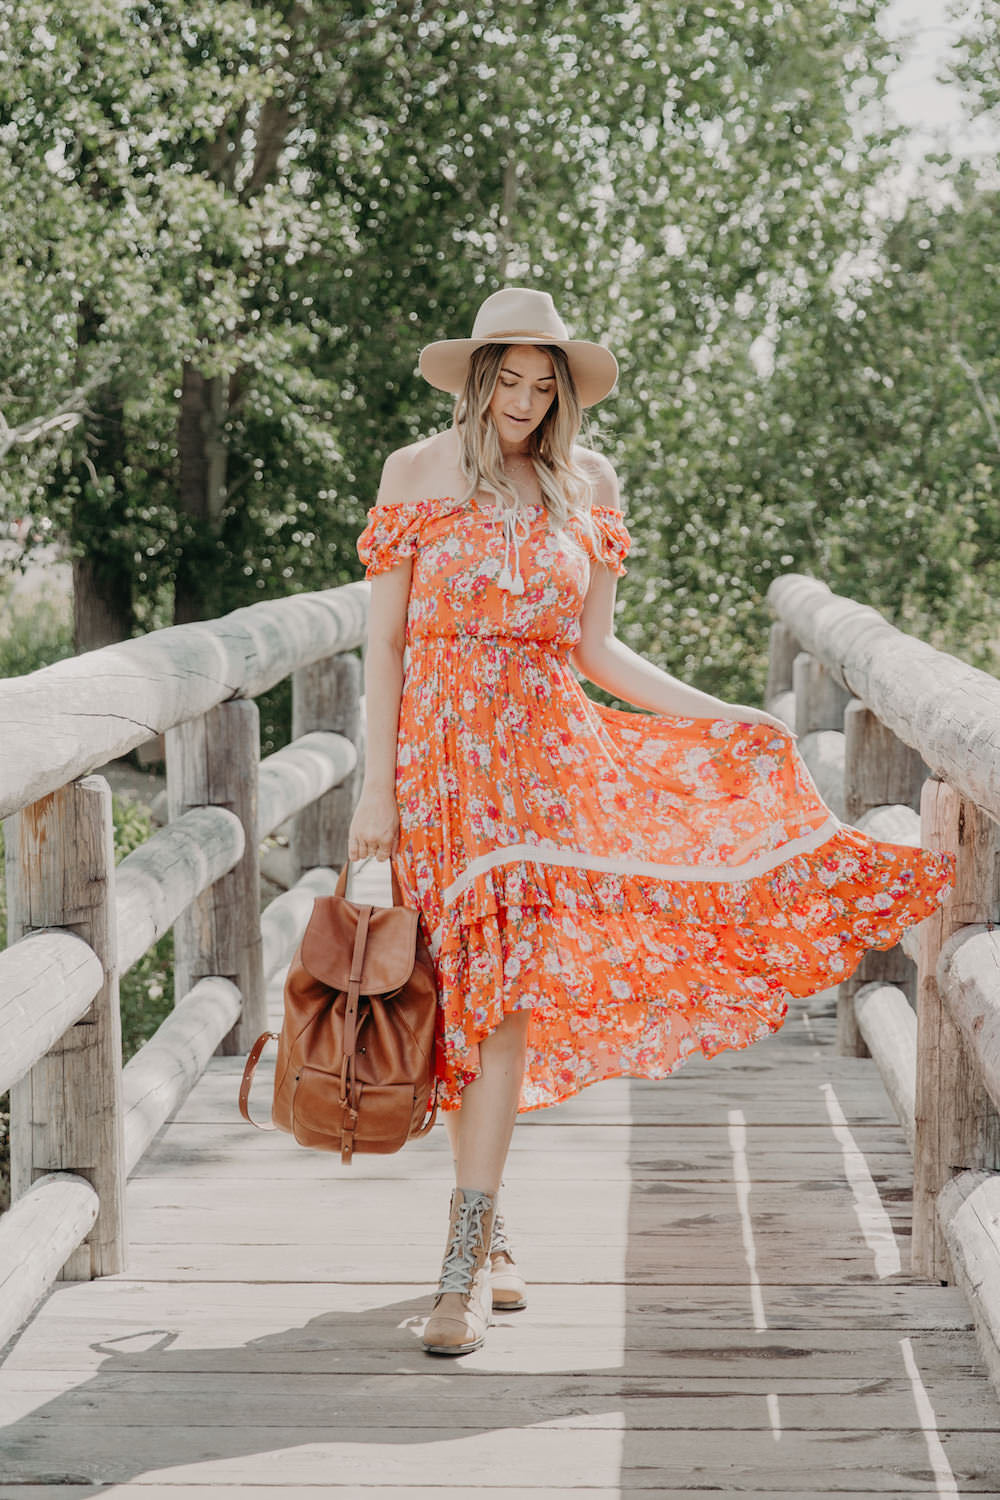 Dash of Darling shares an off shoulder orange dress in Jackson Hole, Wyoming while 21 weeks pregnant.